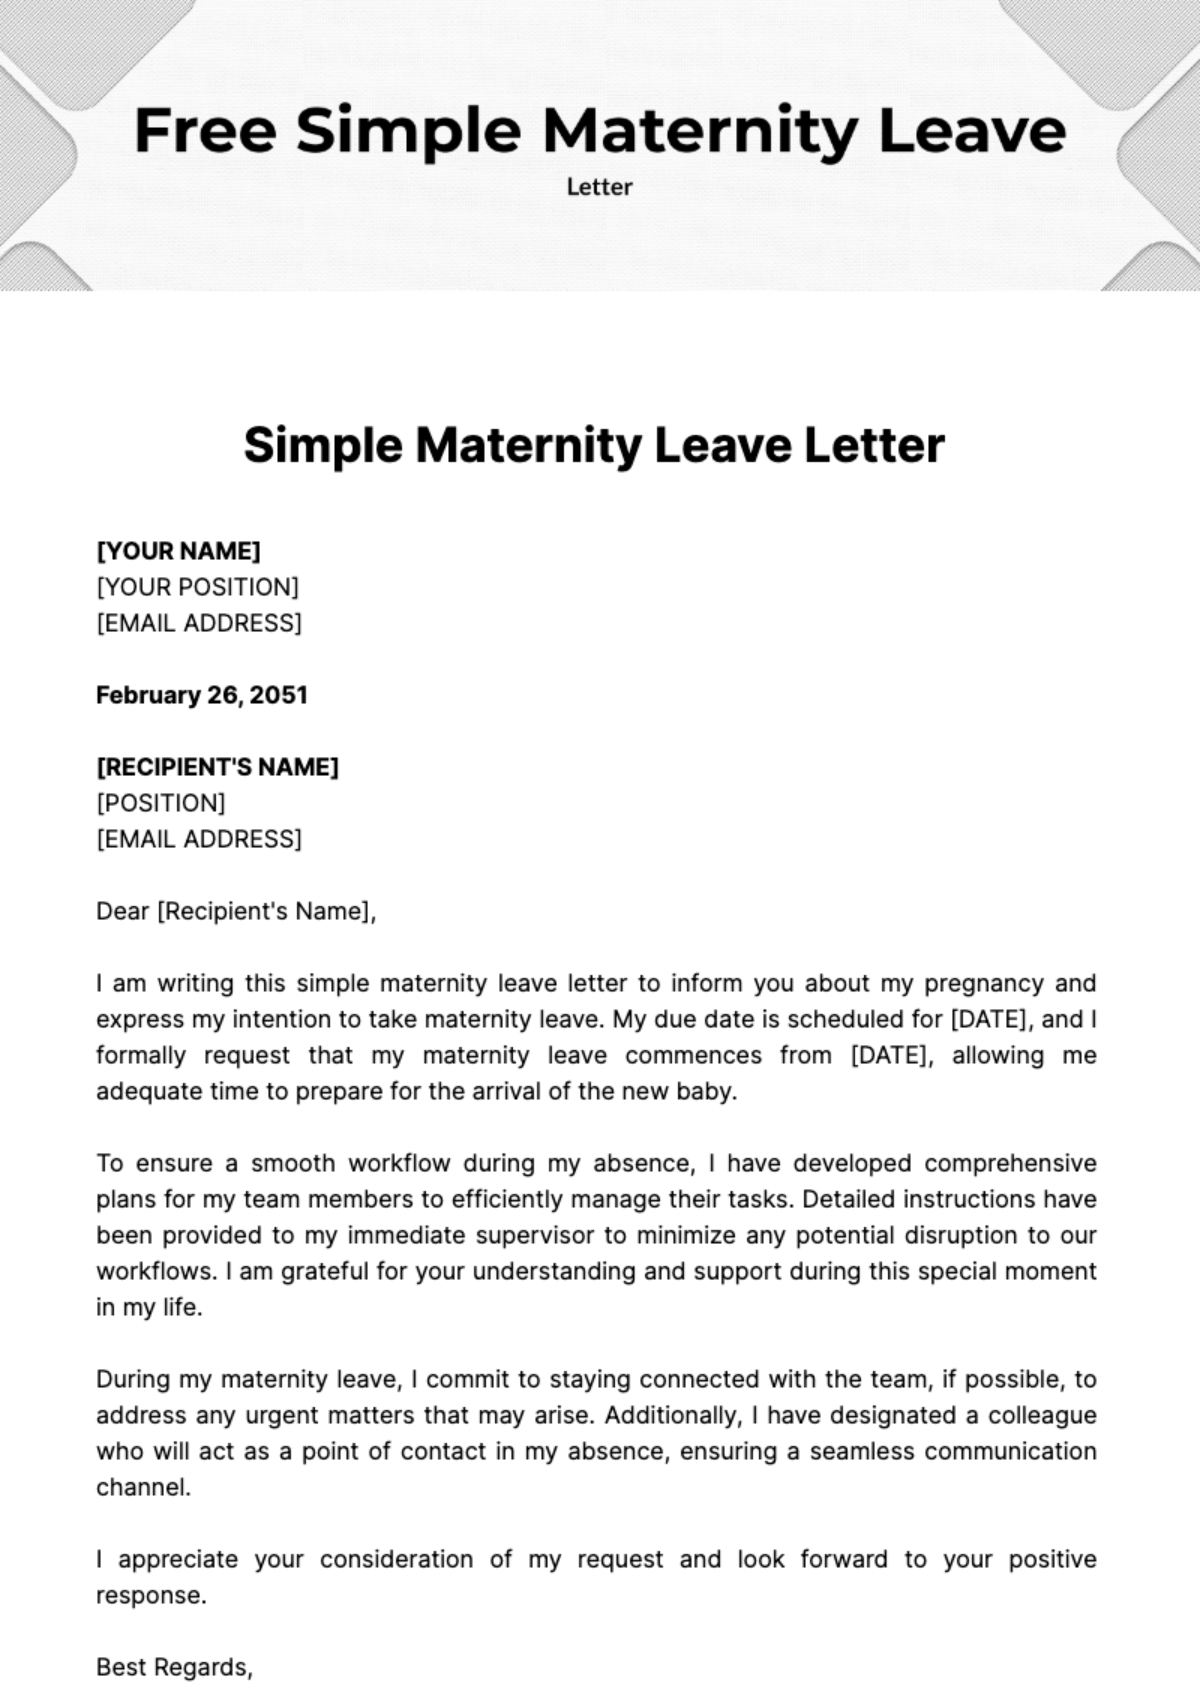 Simple Maternity Leave Letter Template